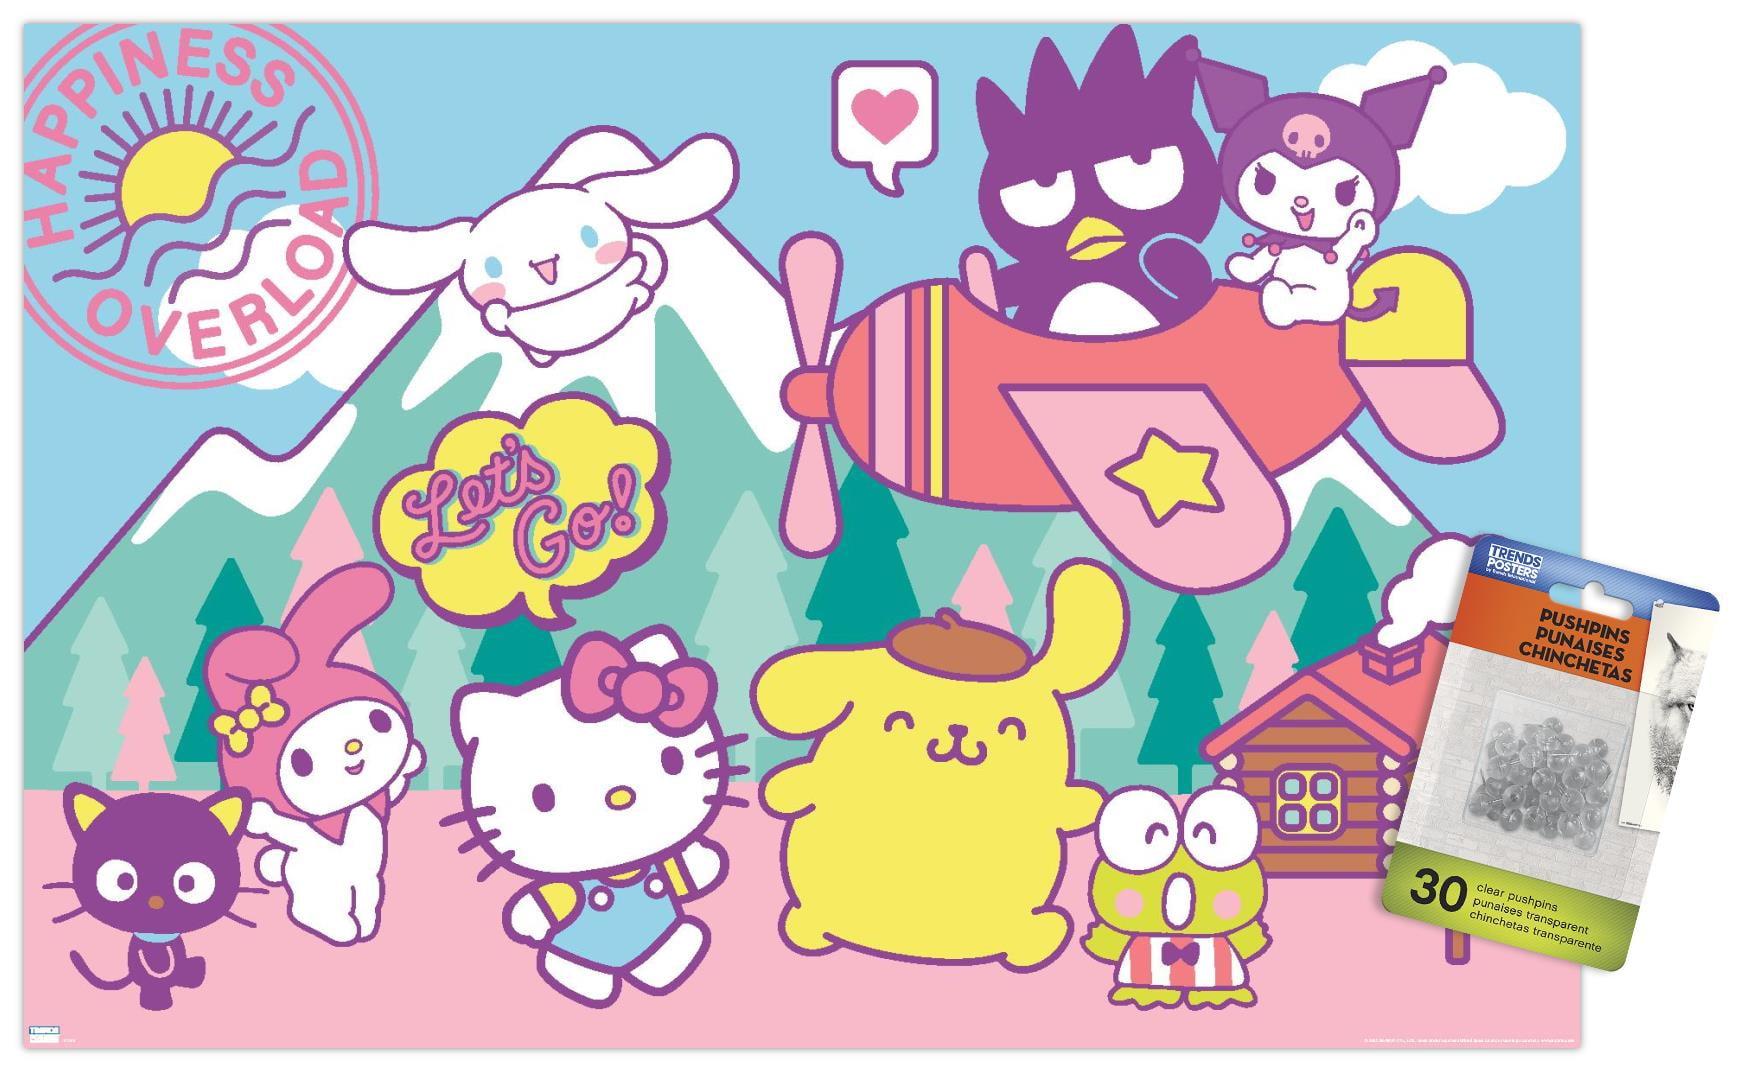 Neon - Hello Kitty and Friends' Posters 